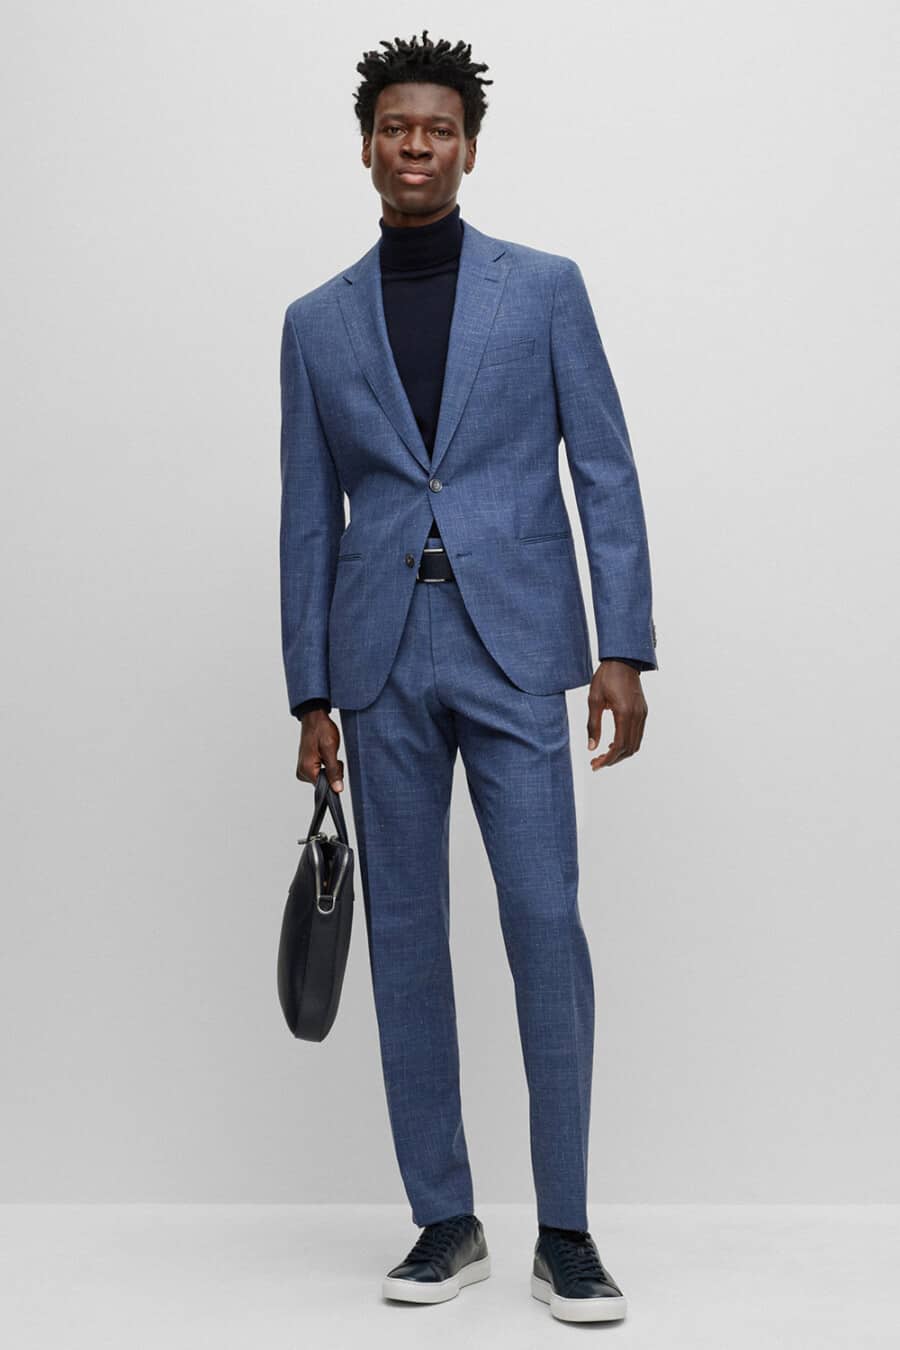 Men's mid blue suit, navy turtleneck, navy leather sneakers and navy leather briefcase outfit